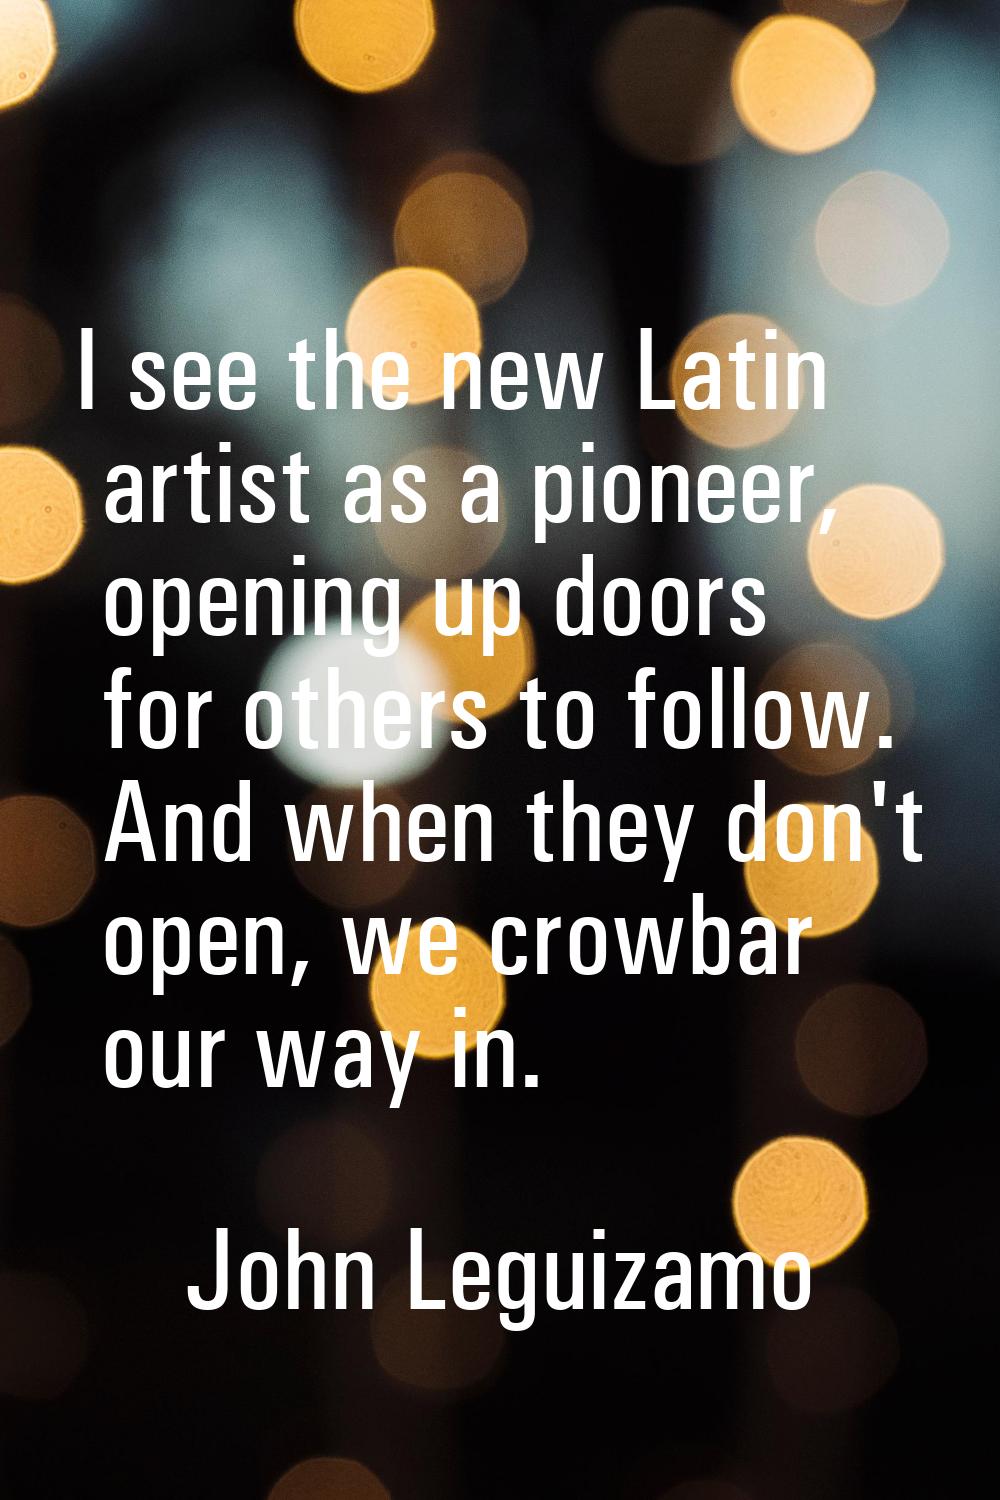 I see the new Latin artist as a pioneer, opening up doors for others to follow. And when they don't